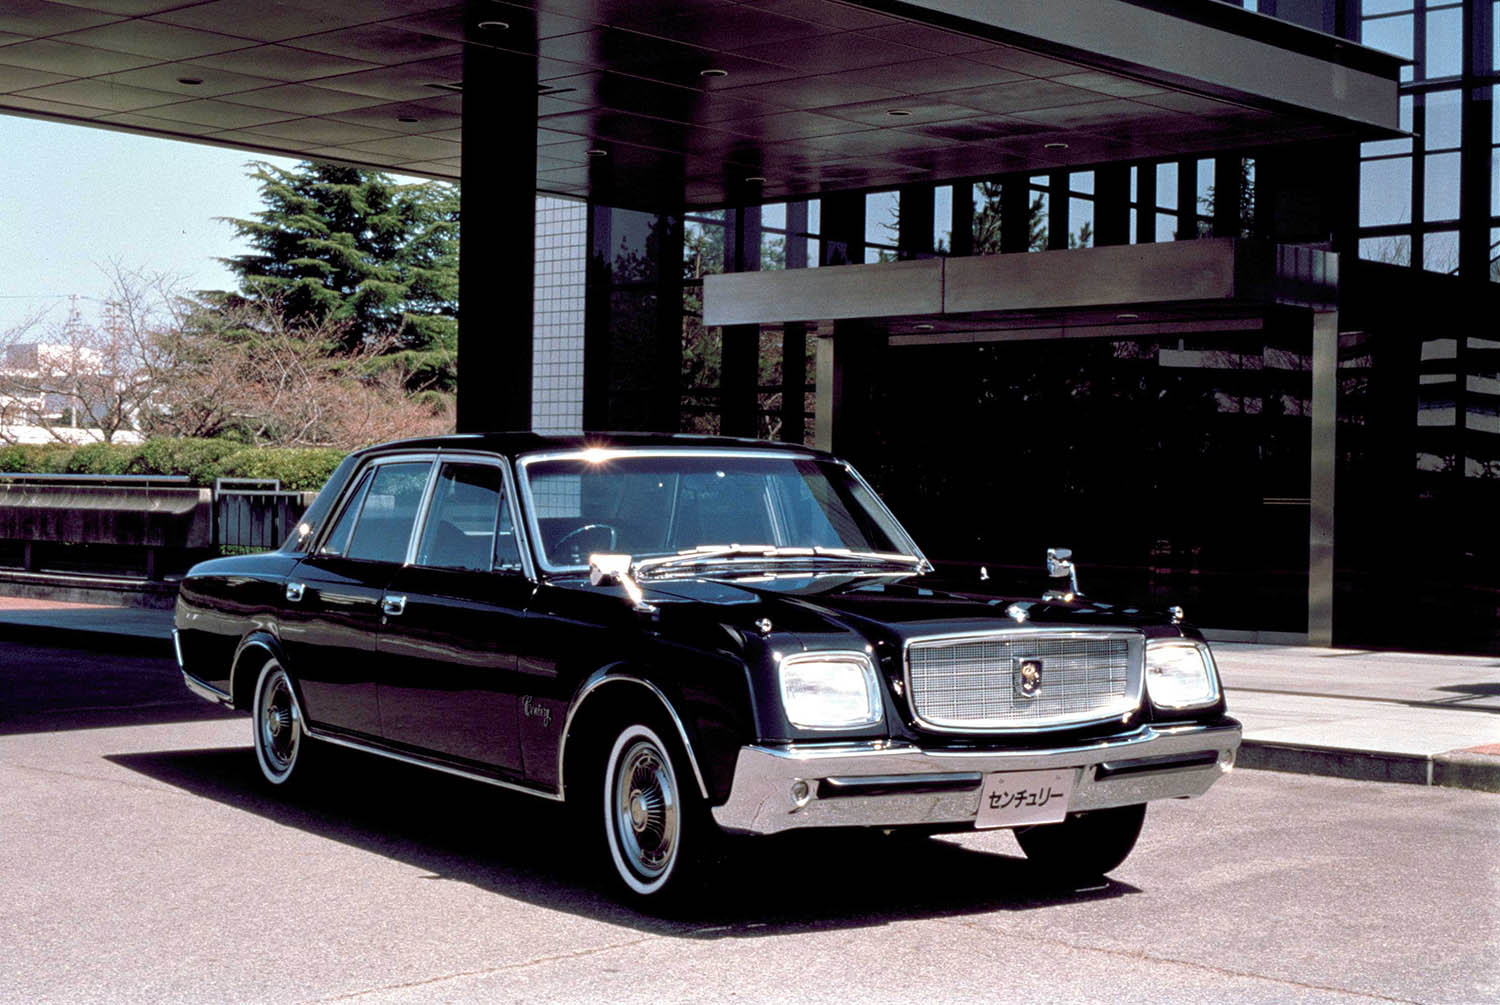 1967 Toyota Century in black in front of a glass-and-steel building